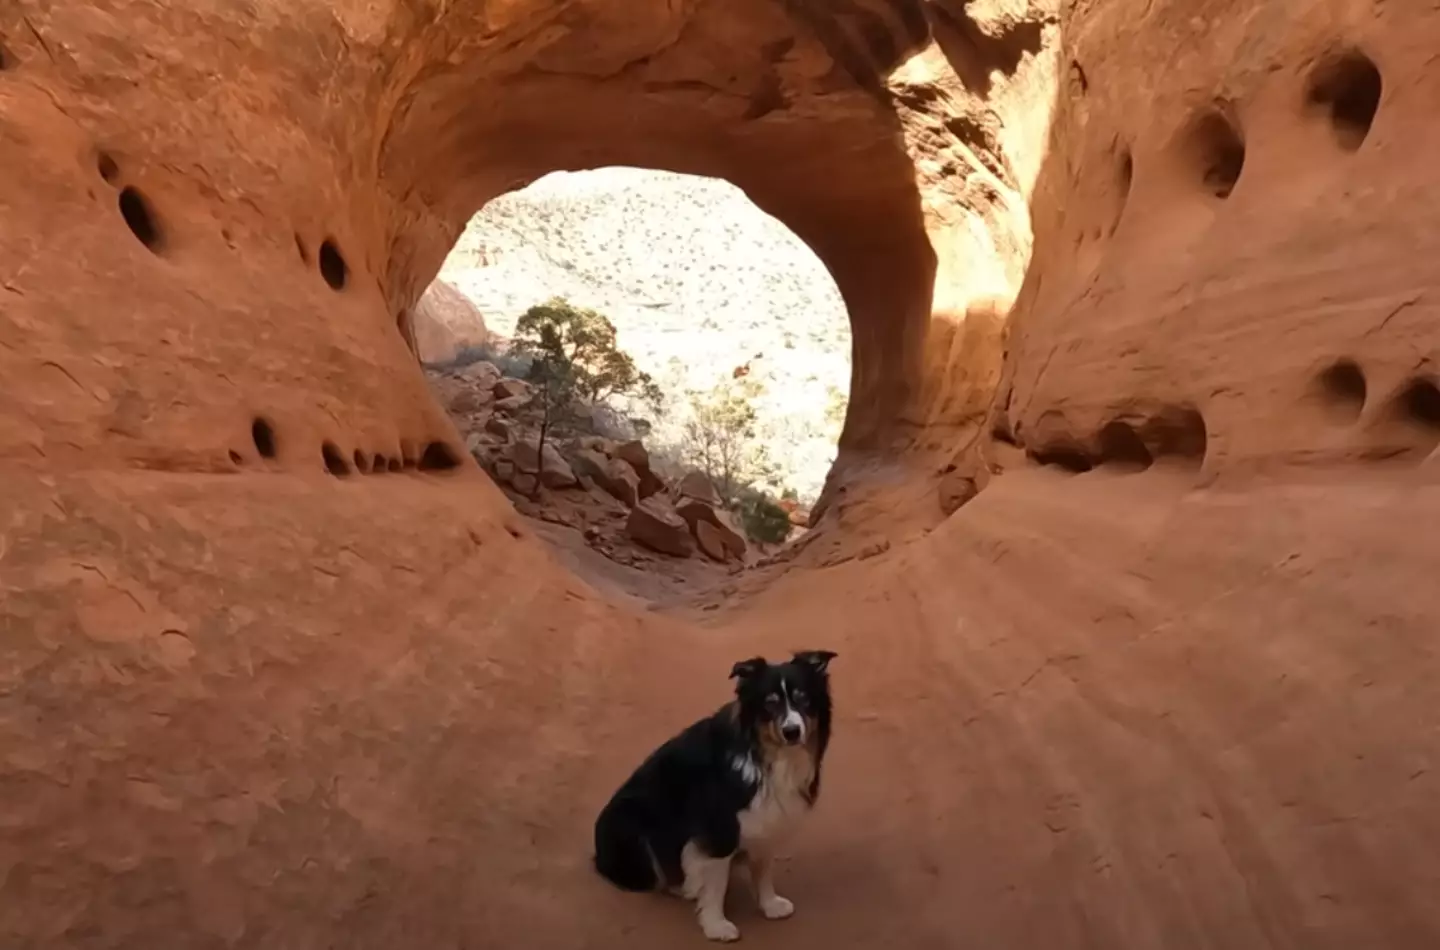 Beautiful sights plus a dog - what's not to love? (YouTube/ @thePOVchannel) 